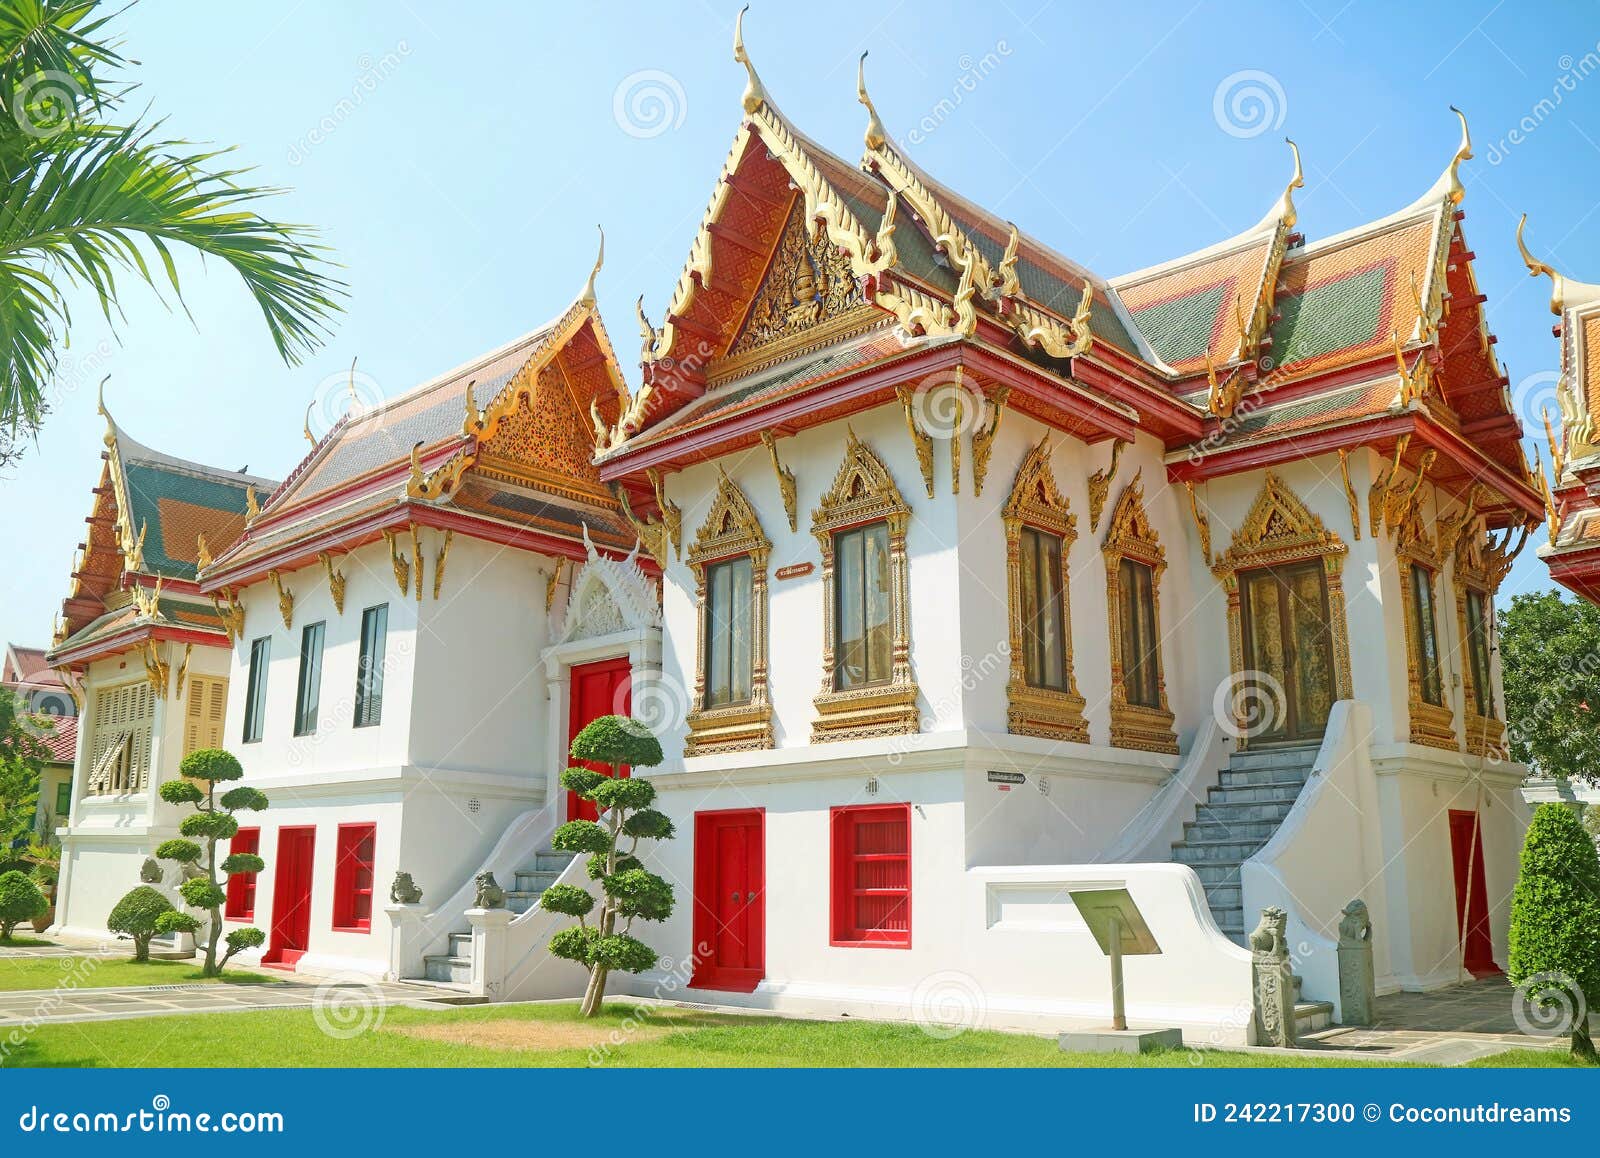 song phanuat throne hall used by king rama v during his monkhood moved and reassembled in wat benchamabophit temple, thailand